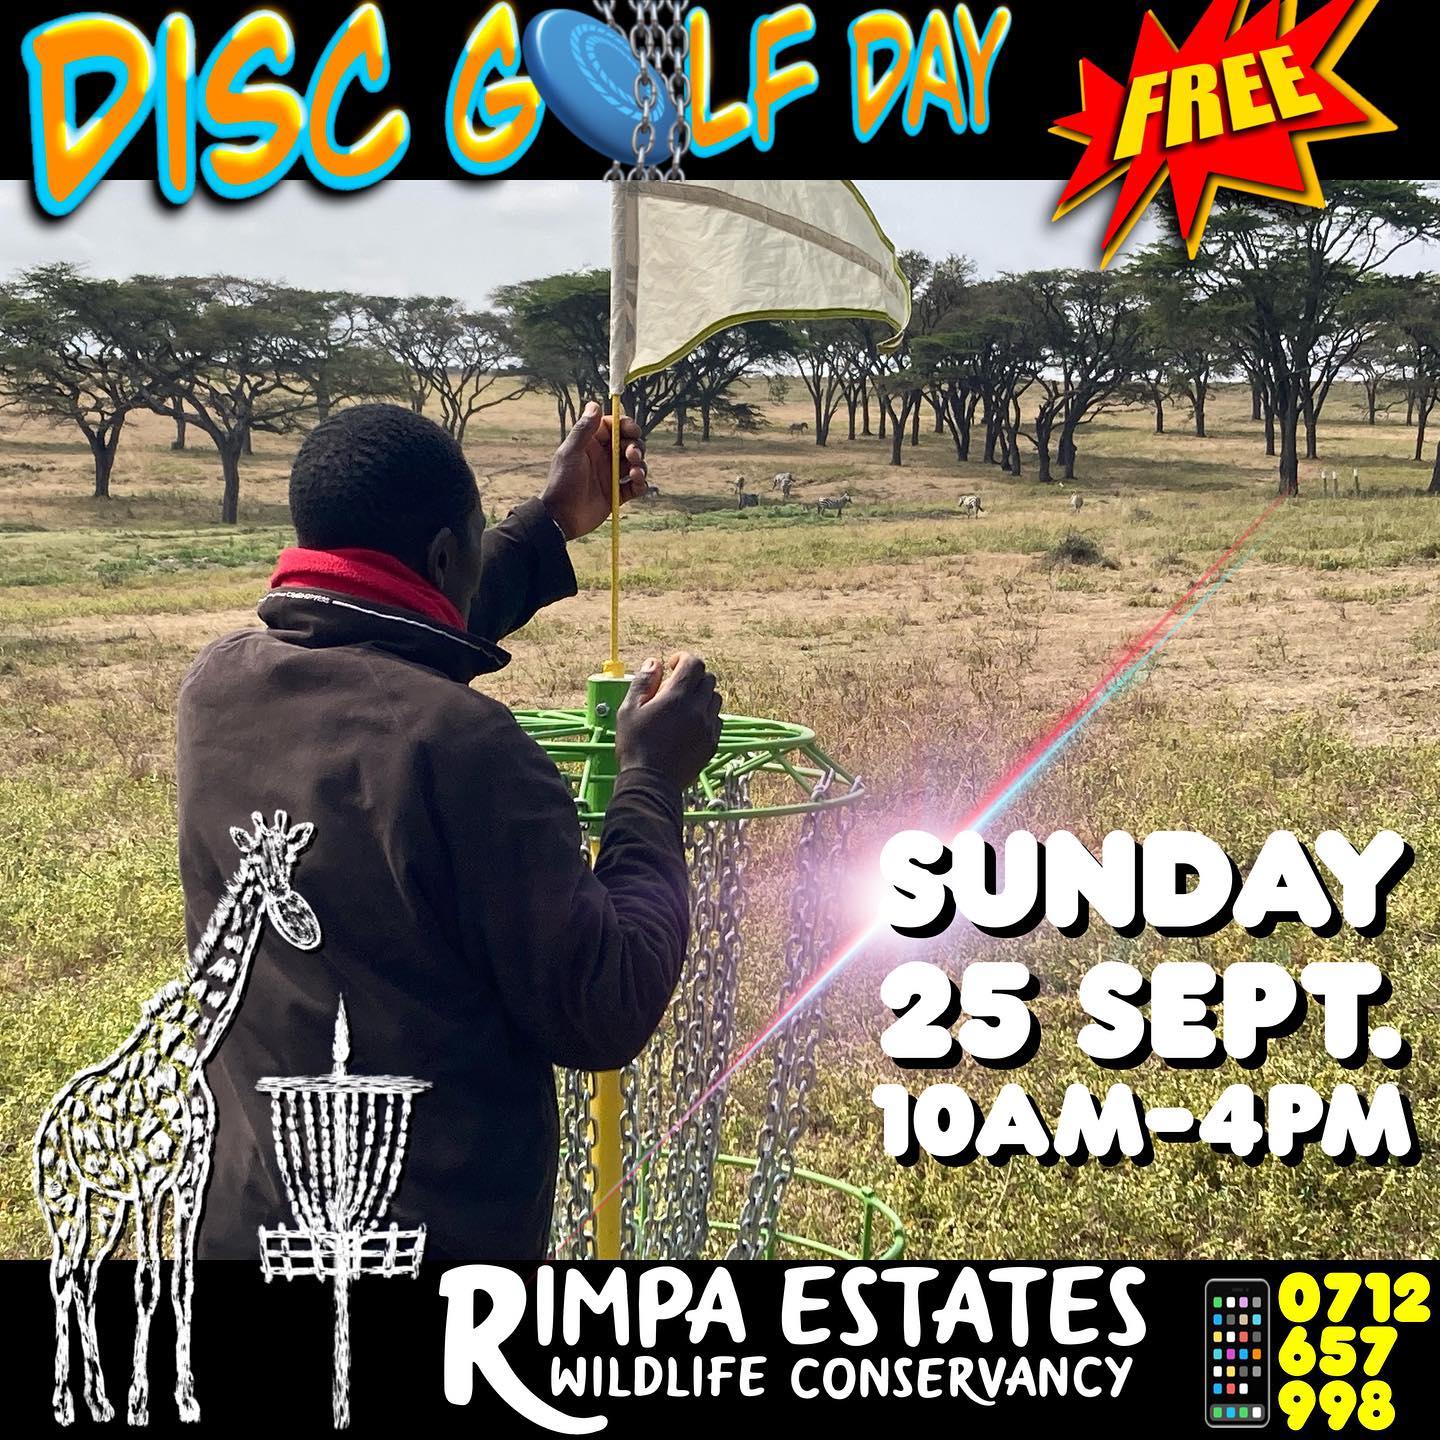 This Sunday, 25 September, is our next FREE disc golf day! 10am-4pm

Disc golf is great fun for all ages. Bring food and enjoy a picnic.

Call or WhatsApp 0712657998

#discgolf #discgolfkenya #discgolfafrica #nairobi #karenkenya #nairobifamily #nairobifamilygetaway #kenyasports